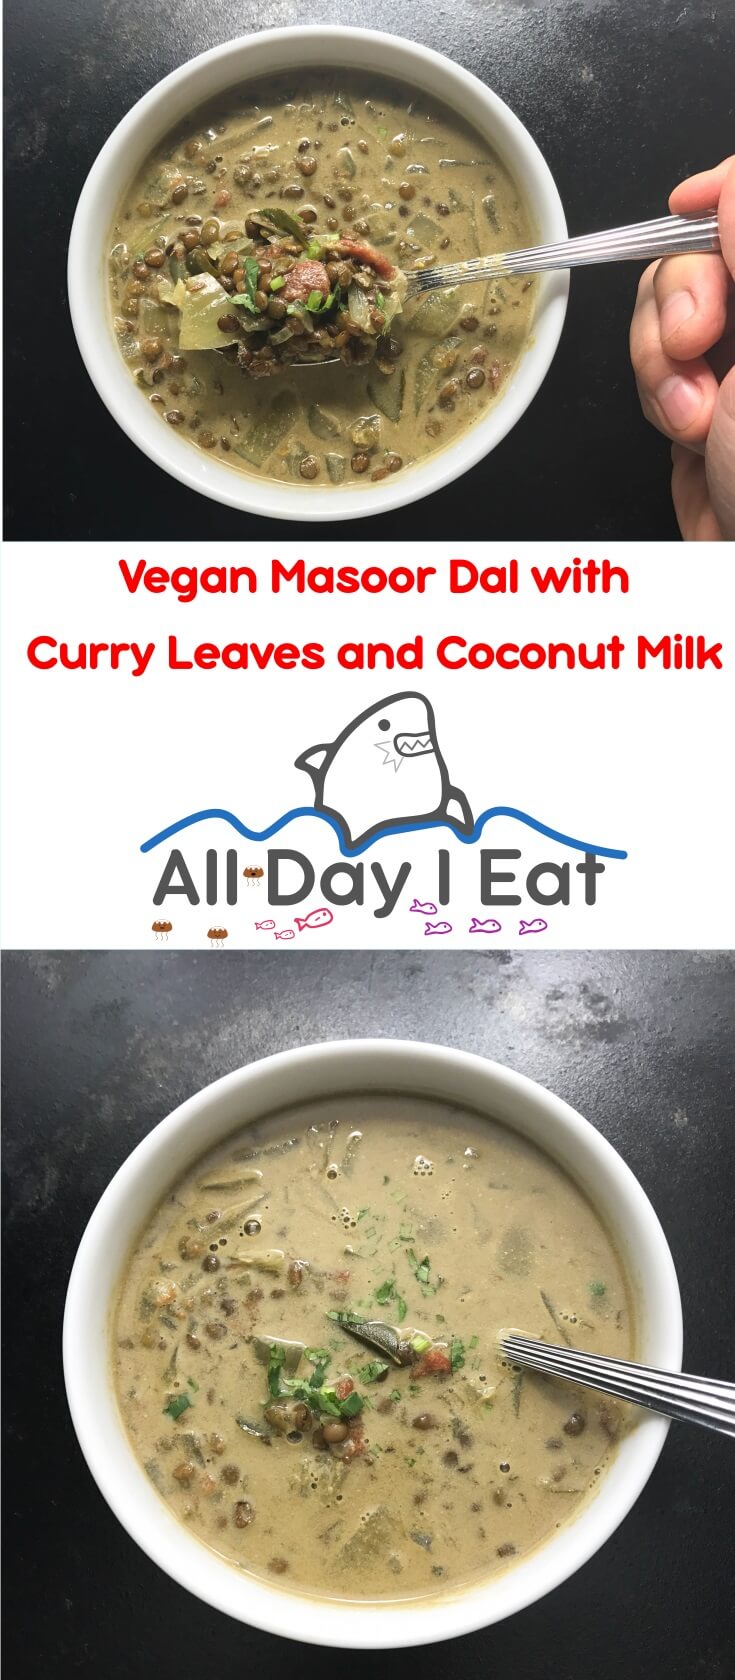 Vegan Masoor Dal with Curry Leaves and Coconut Milk. A rich and delicious way to get a taste of India in your diet | www.alldayieat.com